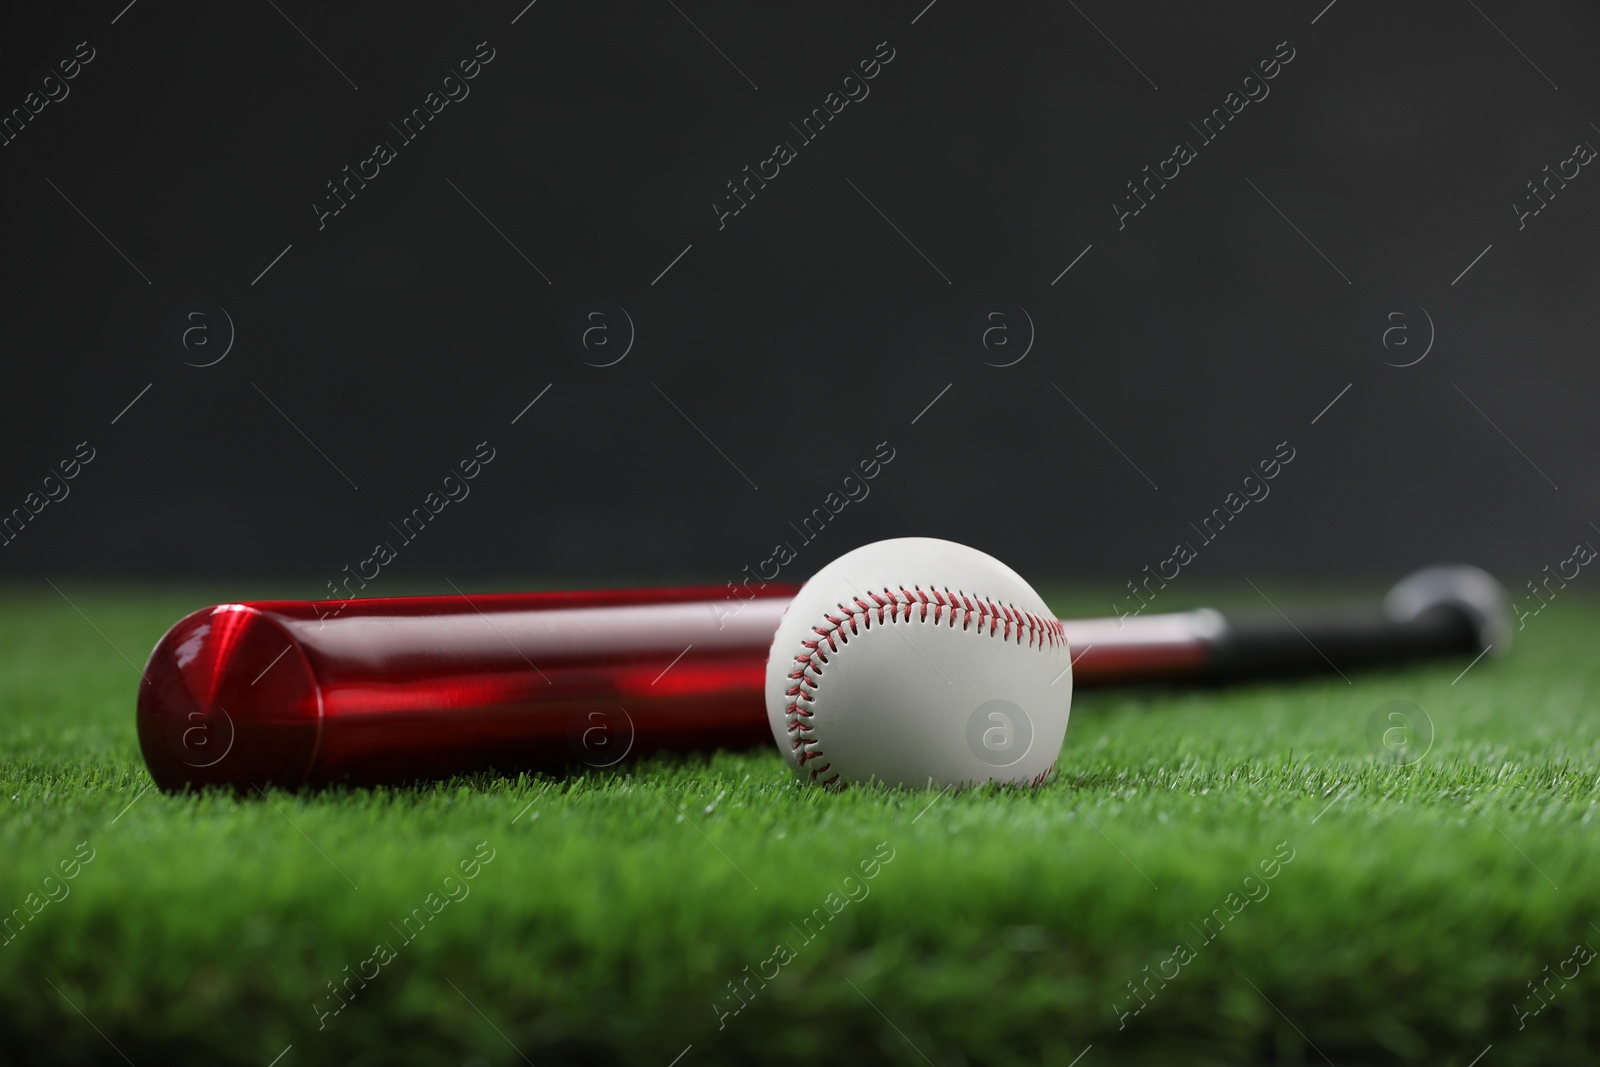 Photo of Baseball bat and ball on green grass against dark background. Space for text